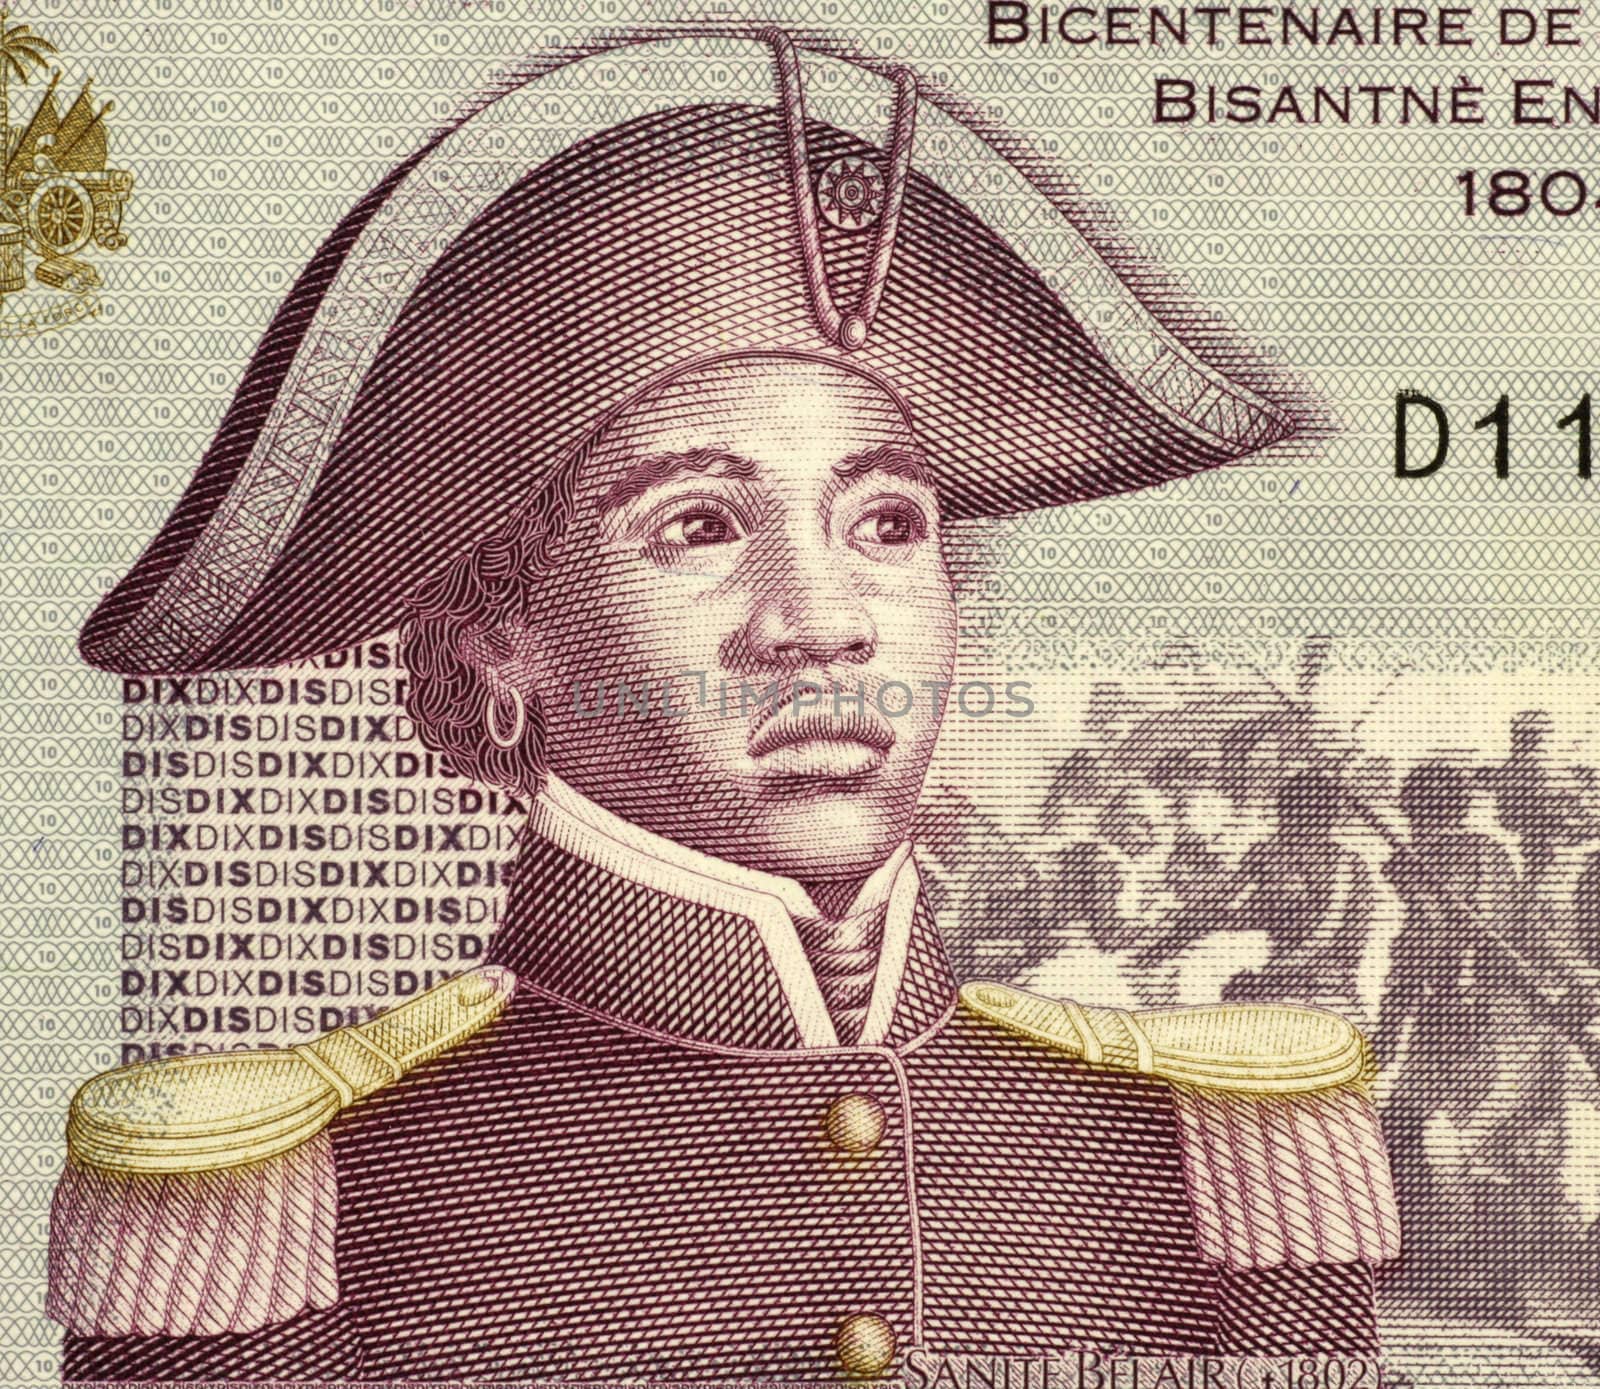 Sanite Belair (1781-1805) on 10 Gourdes 2004 Banknote from Haiti. Freedom fighter and revolutionary, sergeant in the army of Toussaint Louverture.